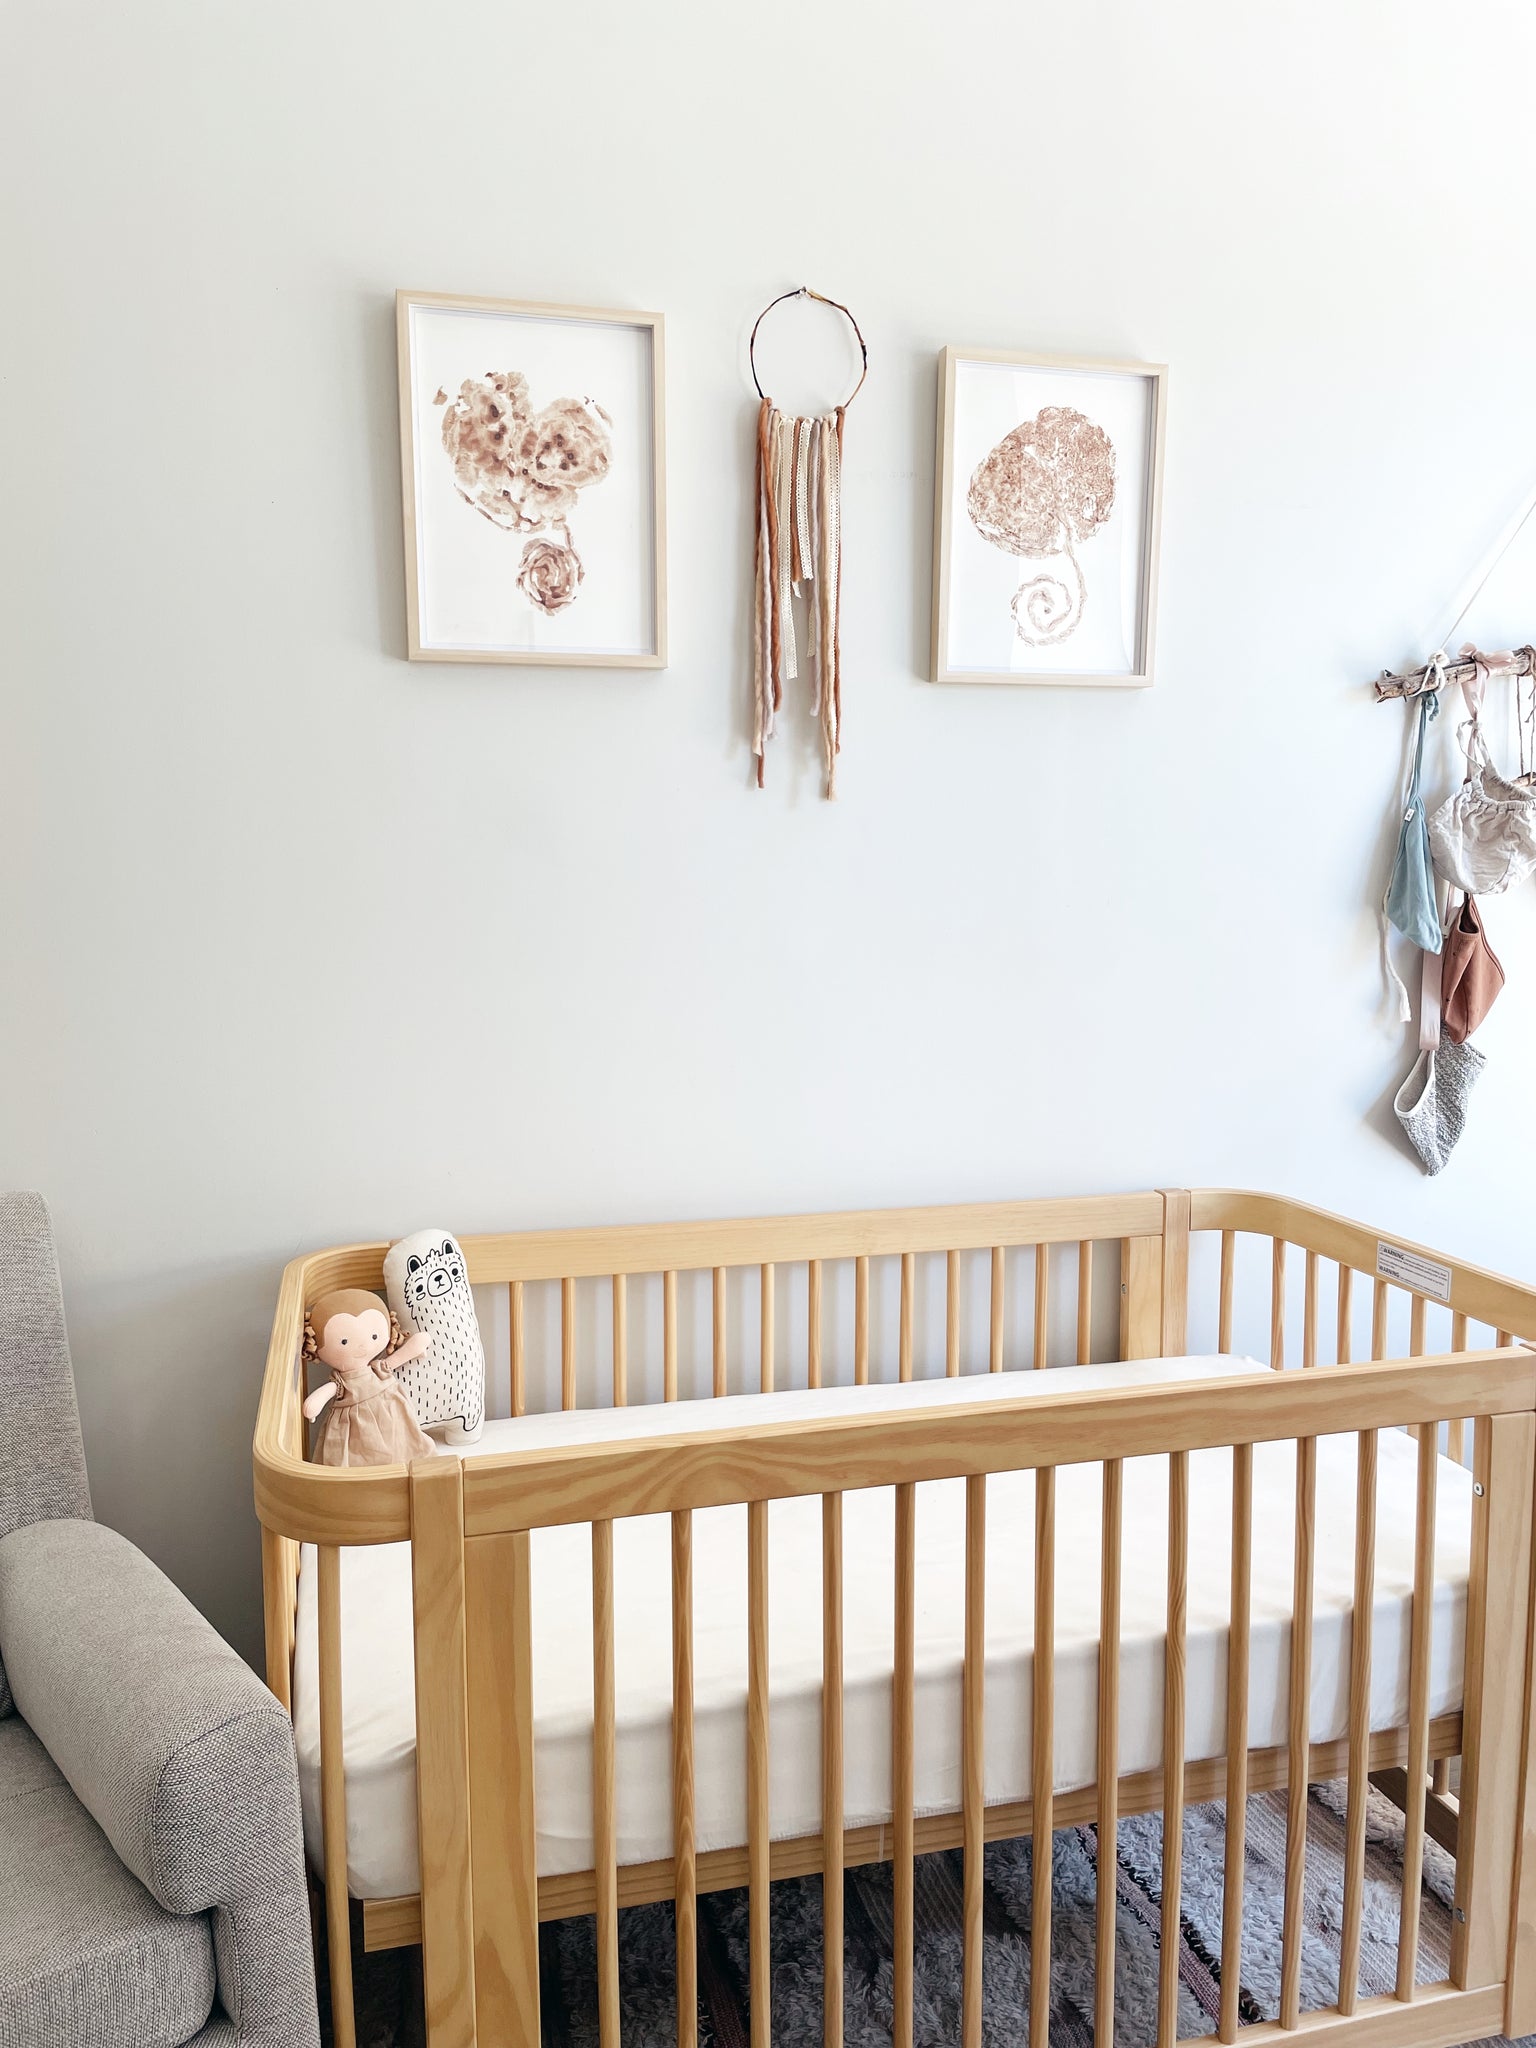 Nursery Items to Look For When Shopping Secondhand